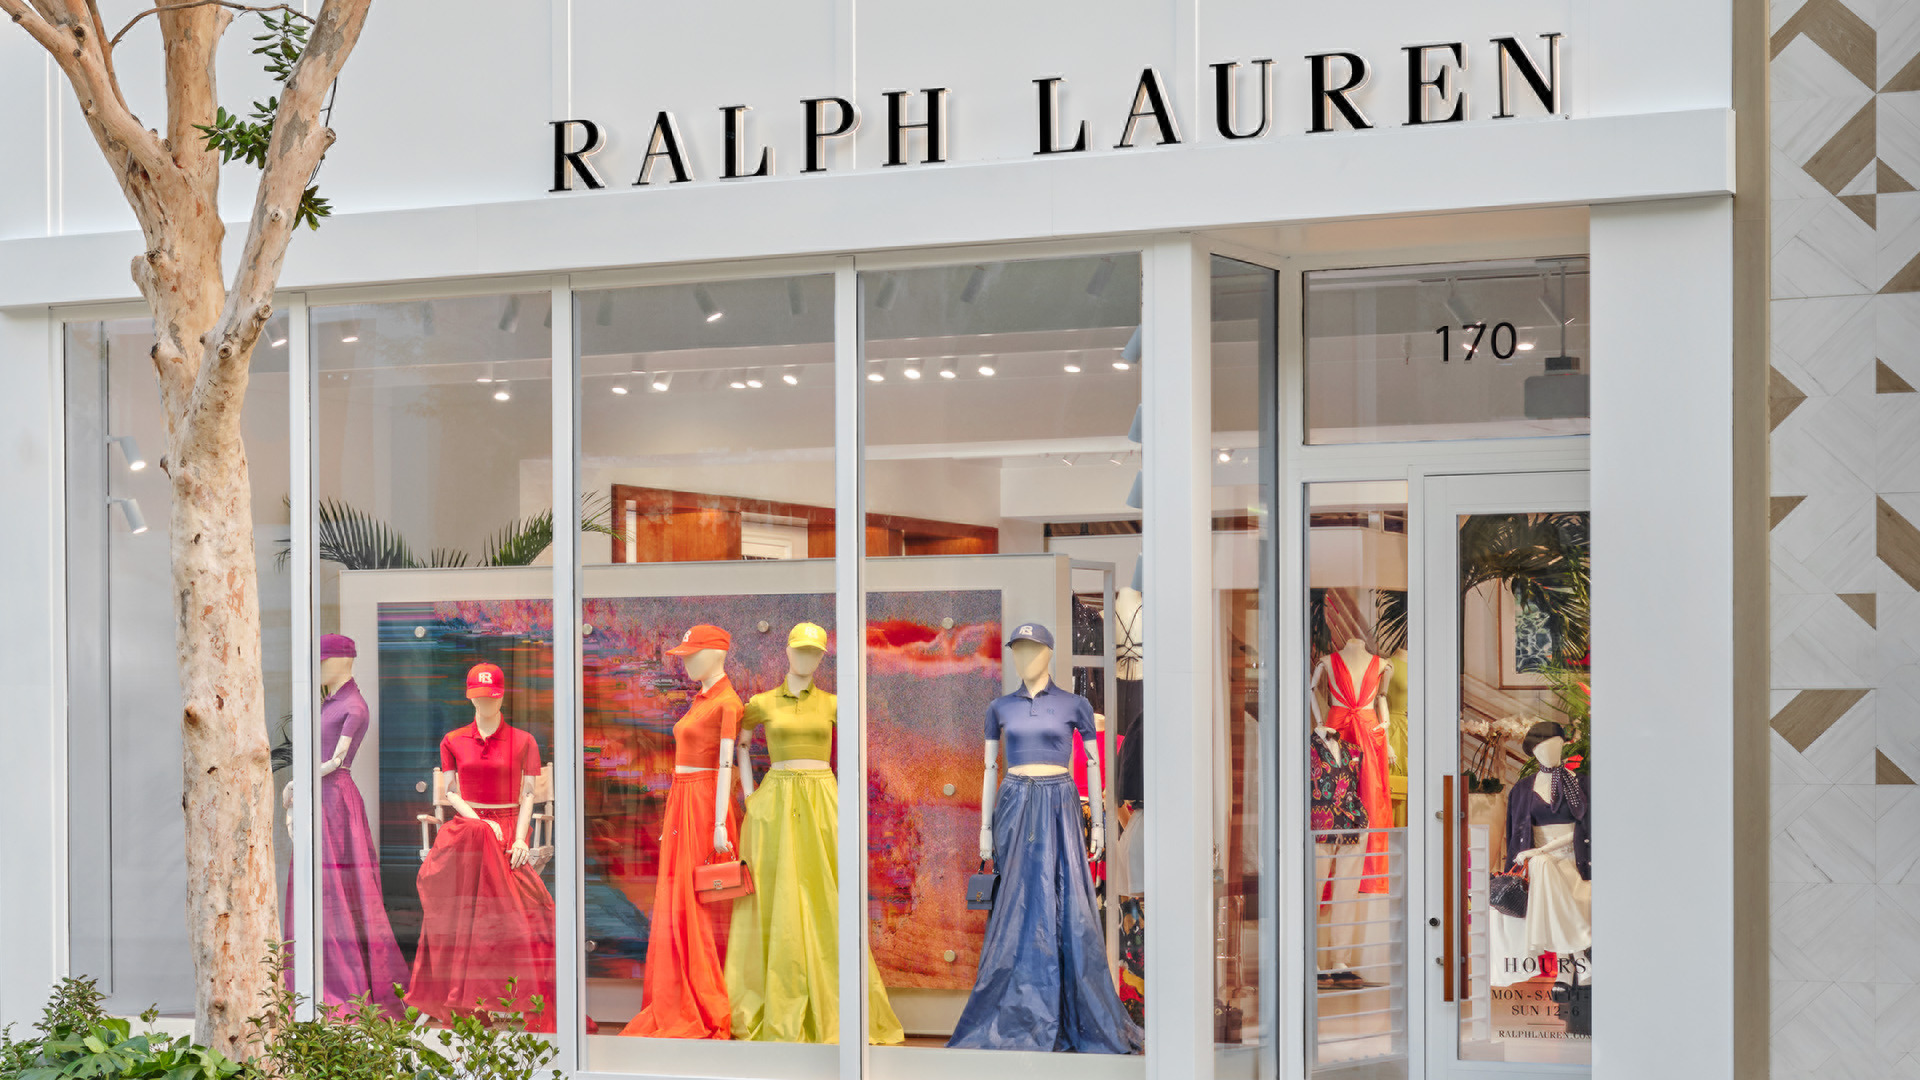 Ralph Lauren's new Miami store to accept crypto payments